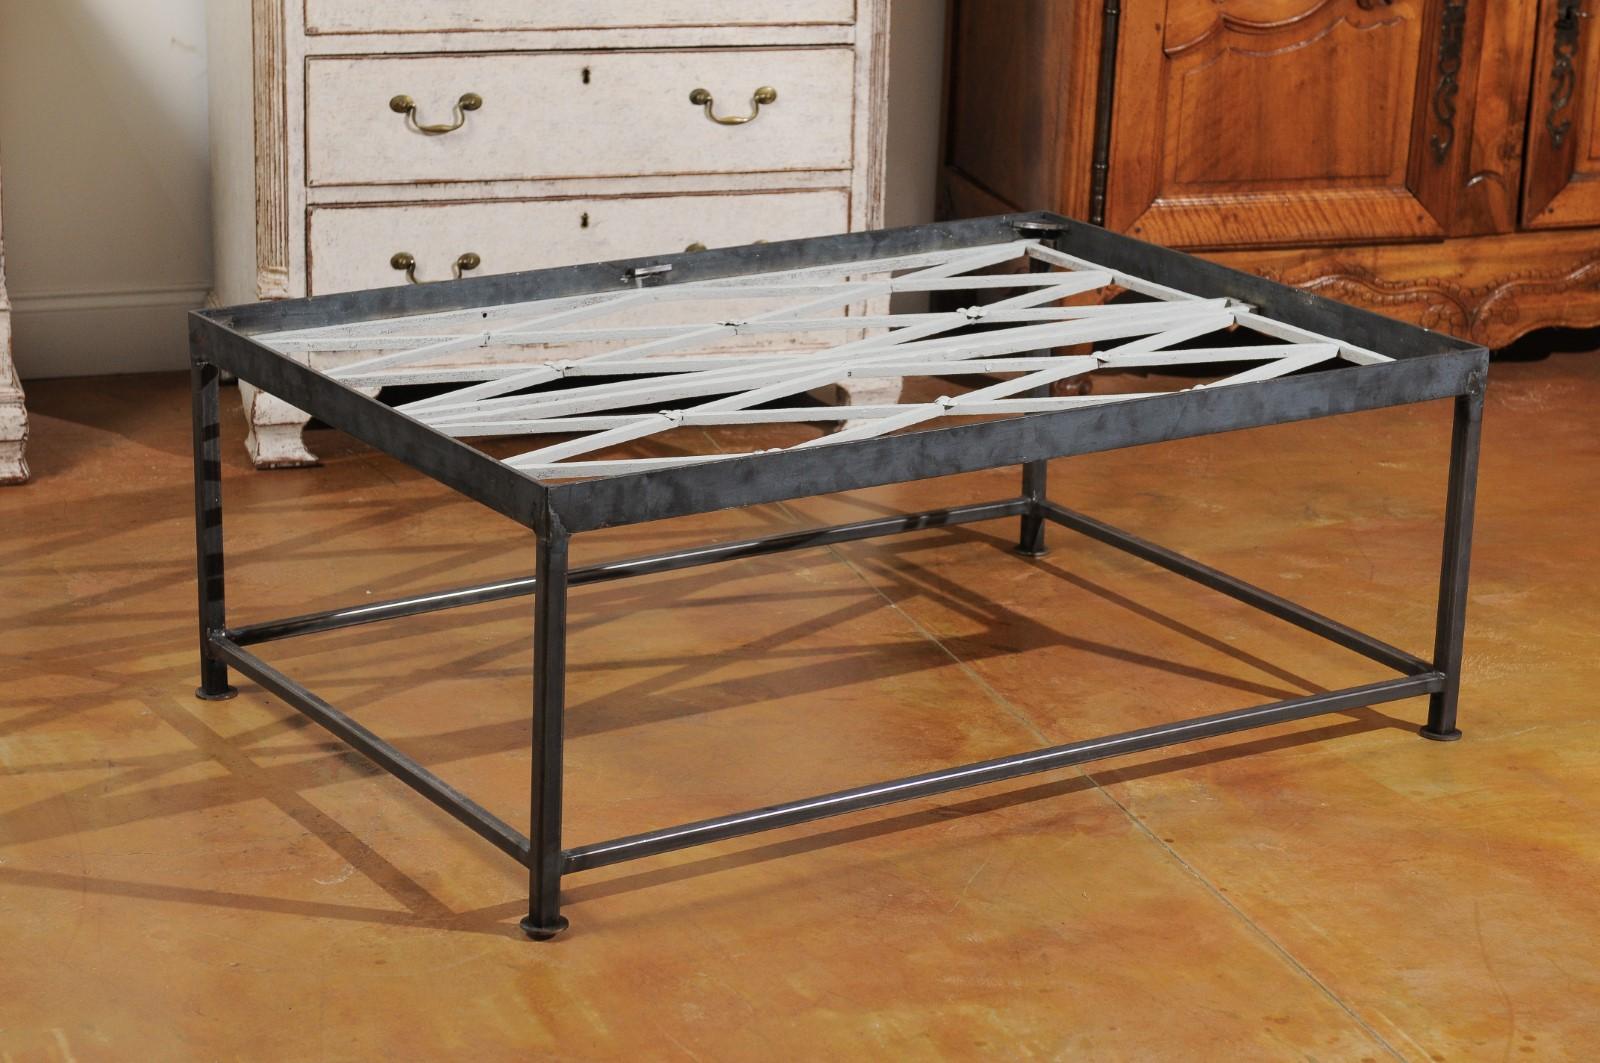 A French contemporary coffee table made from 18th century cast iron railings. Featuring a linear silhouette, this contemporary French coffee table showcases a pierced top made from 18th century cast iron painted railings with diamond patterns